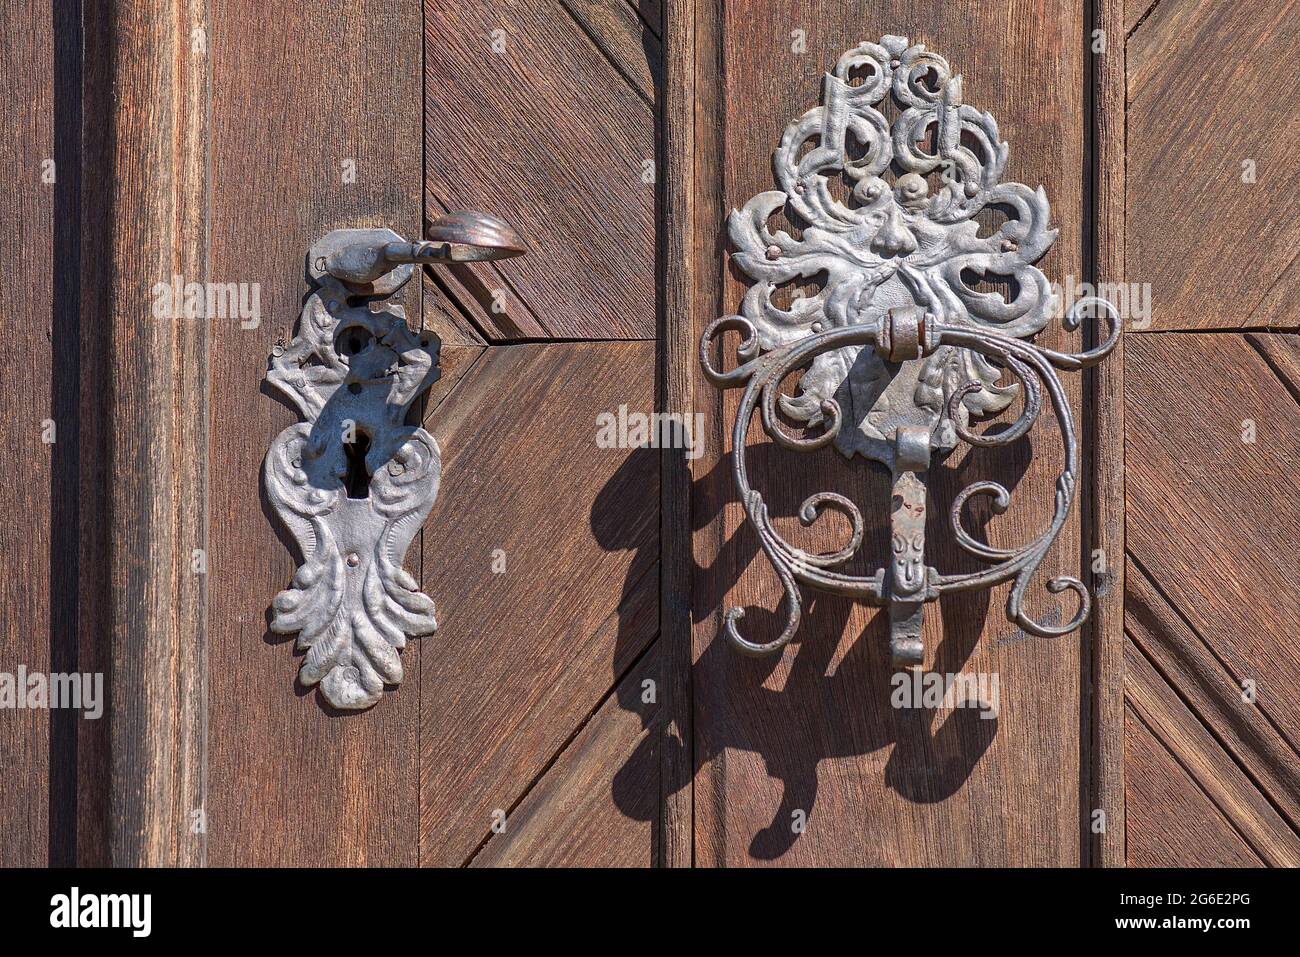 Door knocker at the entrance door to the castle building, Schloss Aschbach, Aschbach, Upper Franconia, Bavaria, Germany Stock Photo